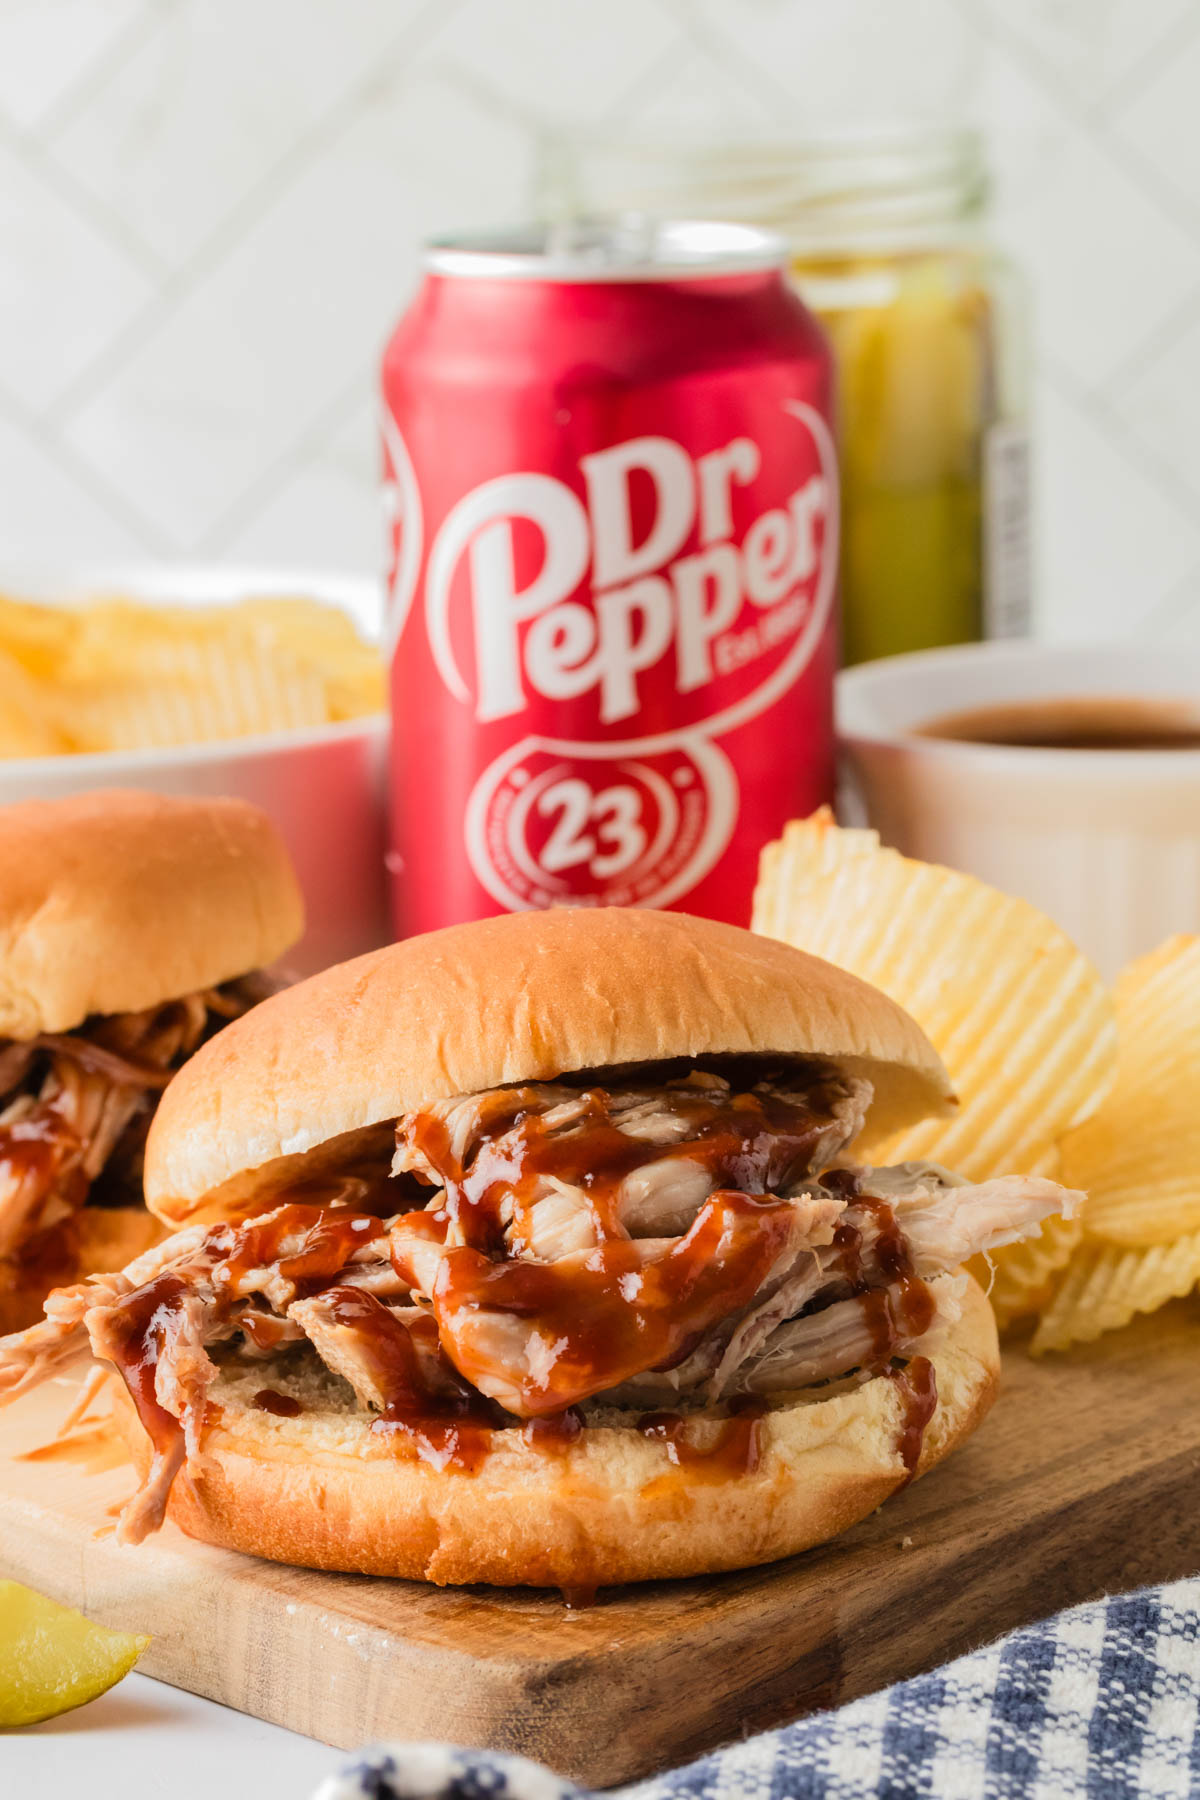 Pulled pork sandwich is featured in the foreground, drizzled with bbq sauce. Potato chips and a can of Dr Pepper are visible in the background, along with another sandwich and a bowl of sauce. 